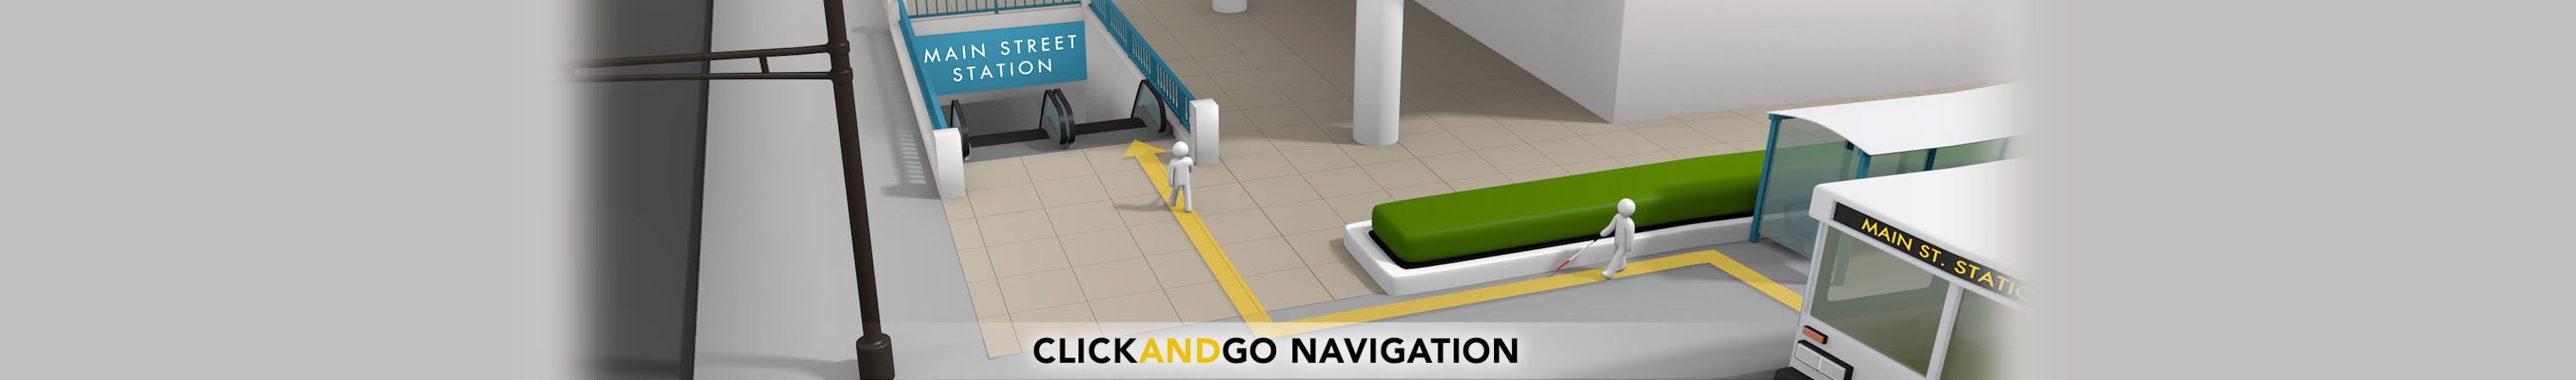 Graphic illustration showing blind pedestrian traveling with support of narrative directions from a bus stop to a nearby subway entrance.